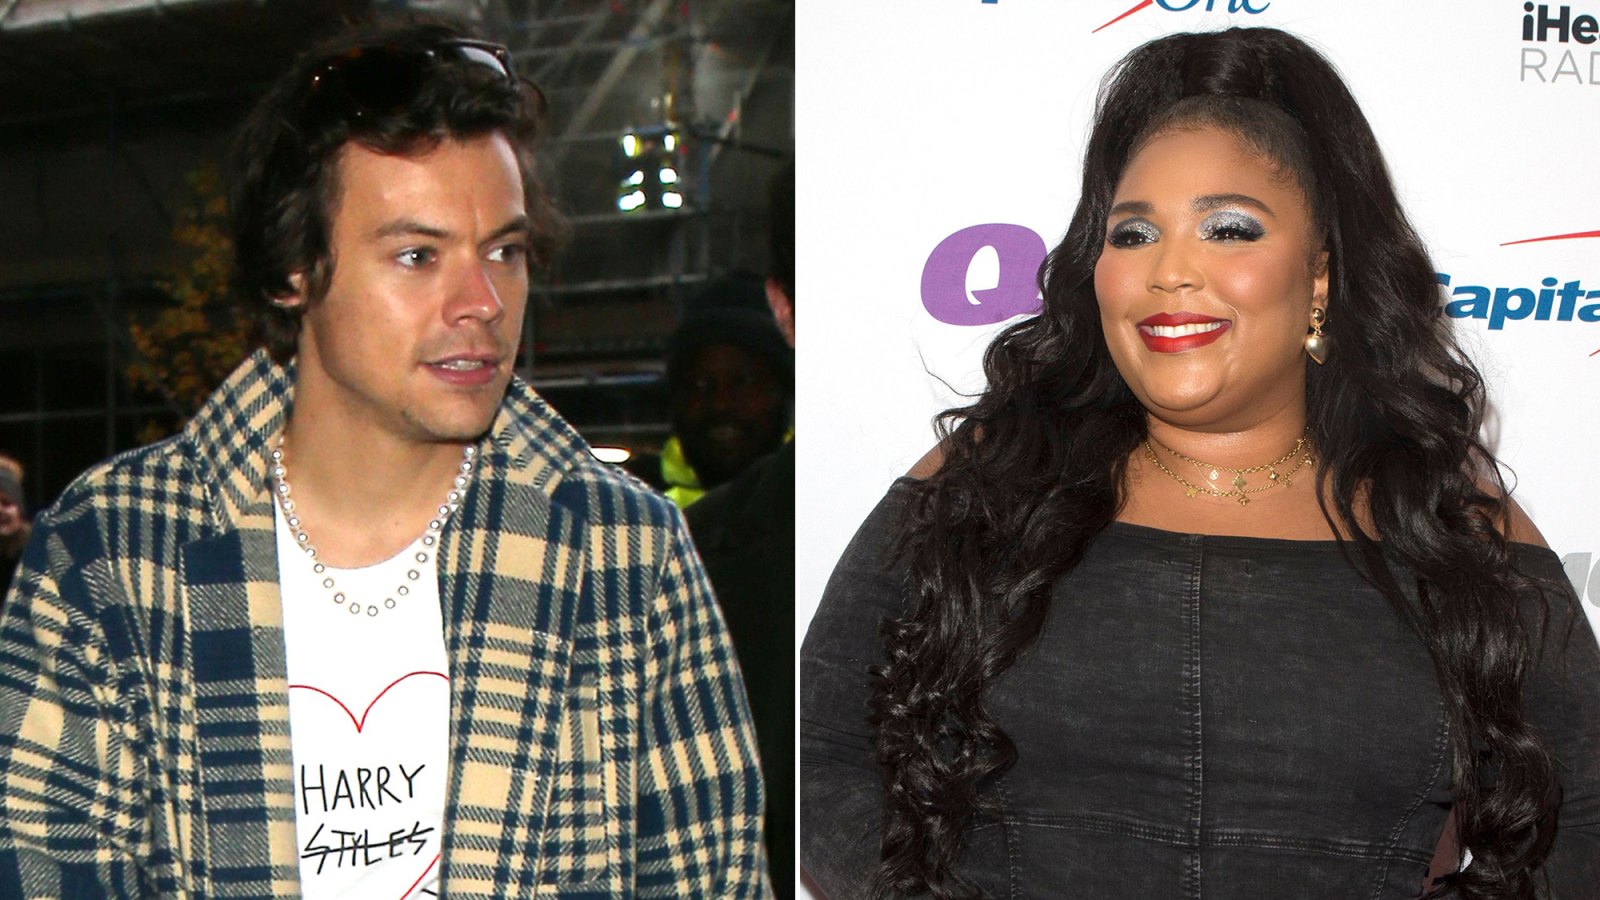 Harry Styles Covering Lizzo's 'Juice' Is the Only Thing You Need to See Today